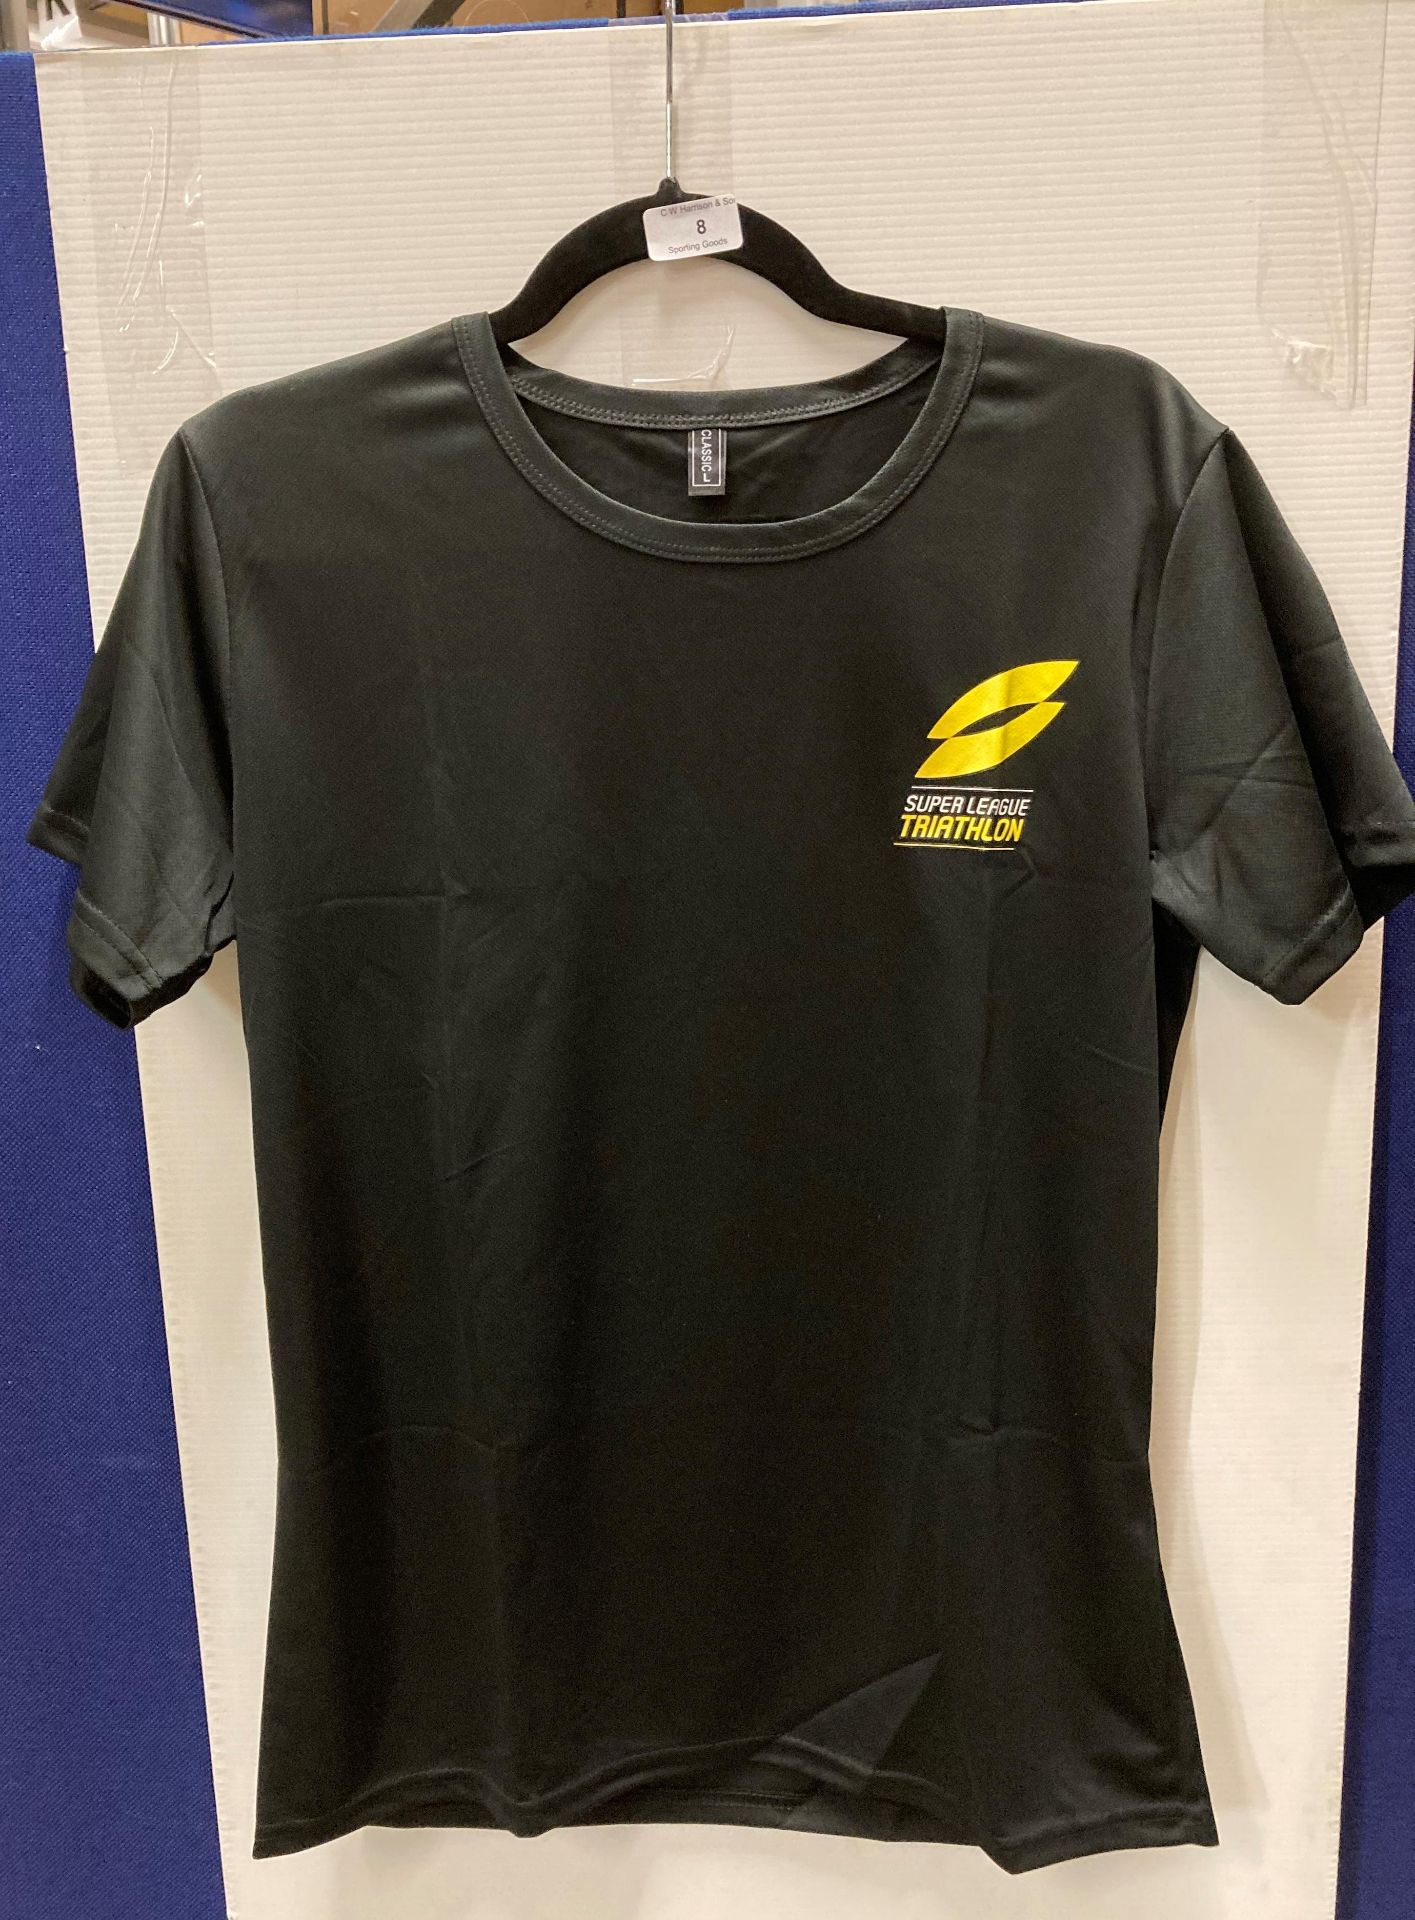 45 x classic Super League Triathlon t-shirts (size L) (please note - crate is property of CWH and